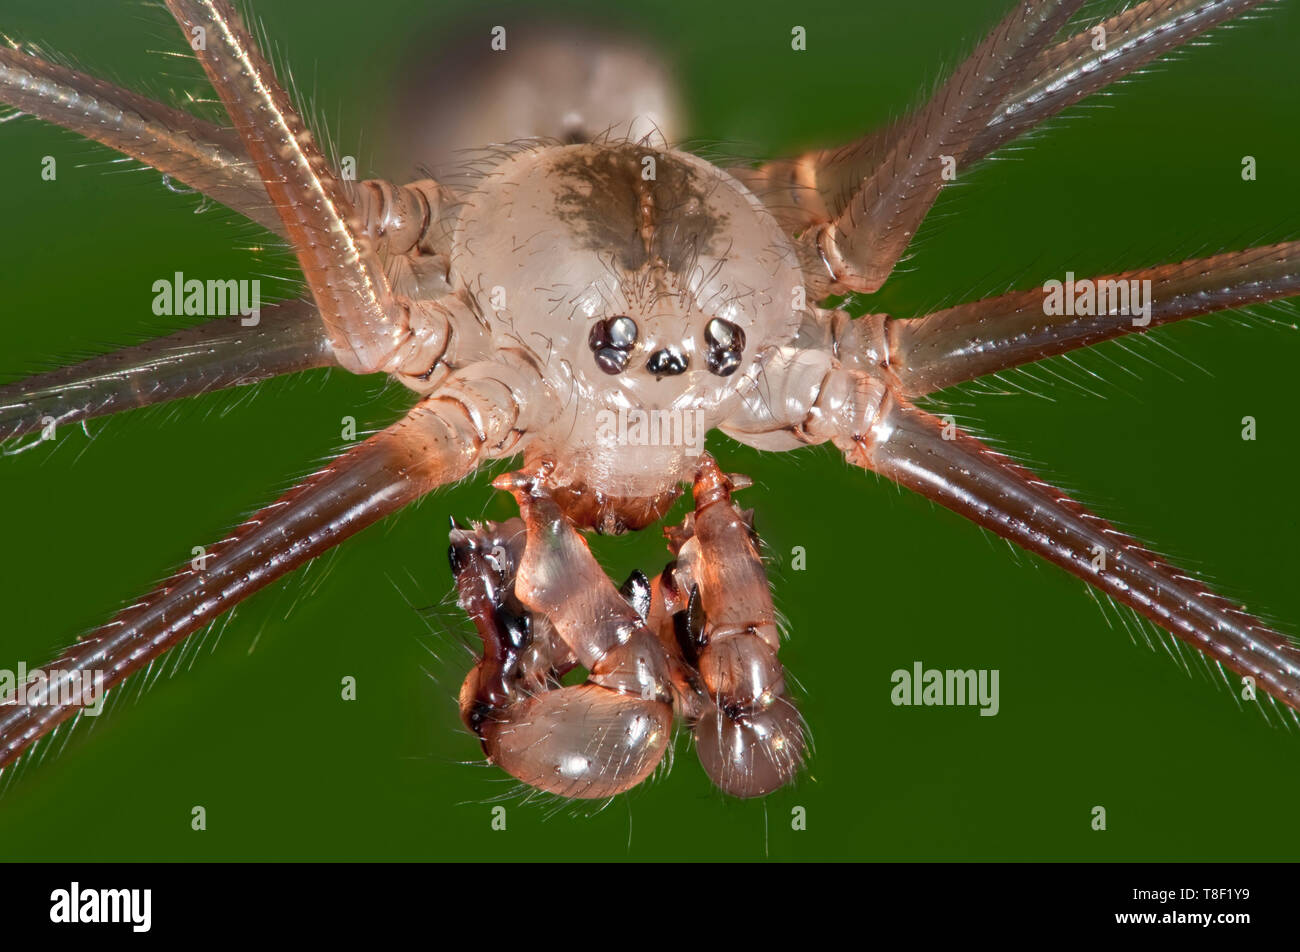 Cellar spider, Pholcus phalangioides, highly magnified portrait showing palps, mandibles, eyes Stock Photo